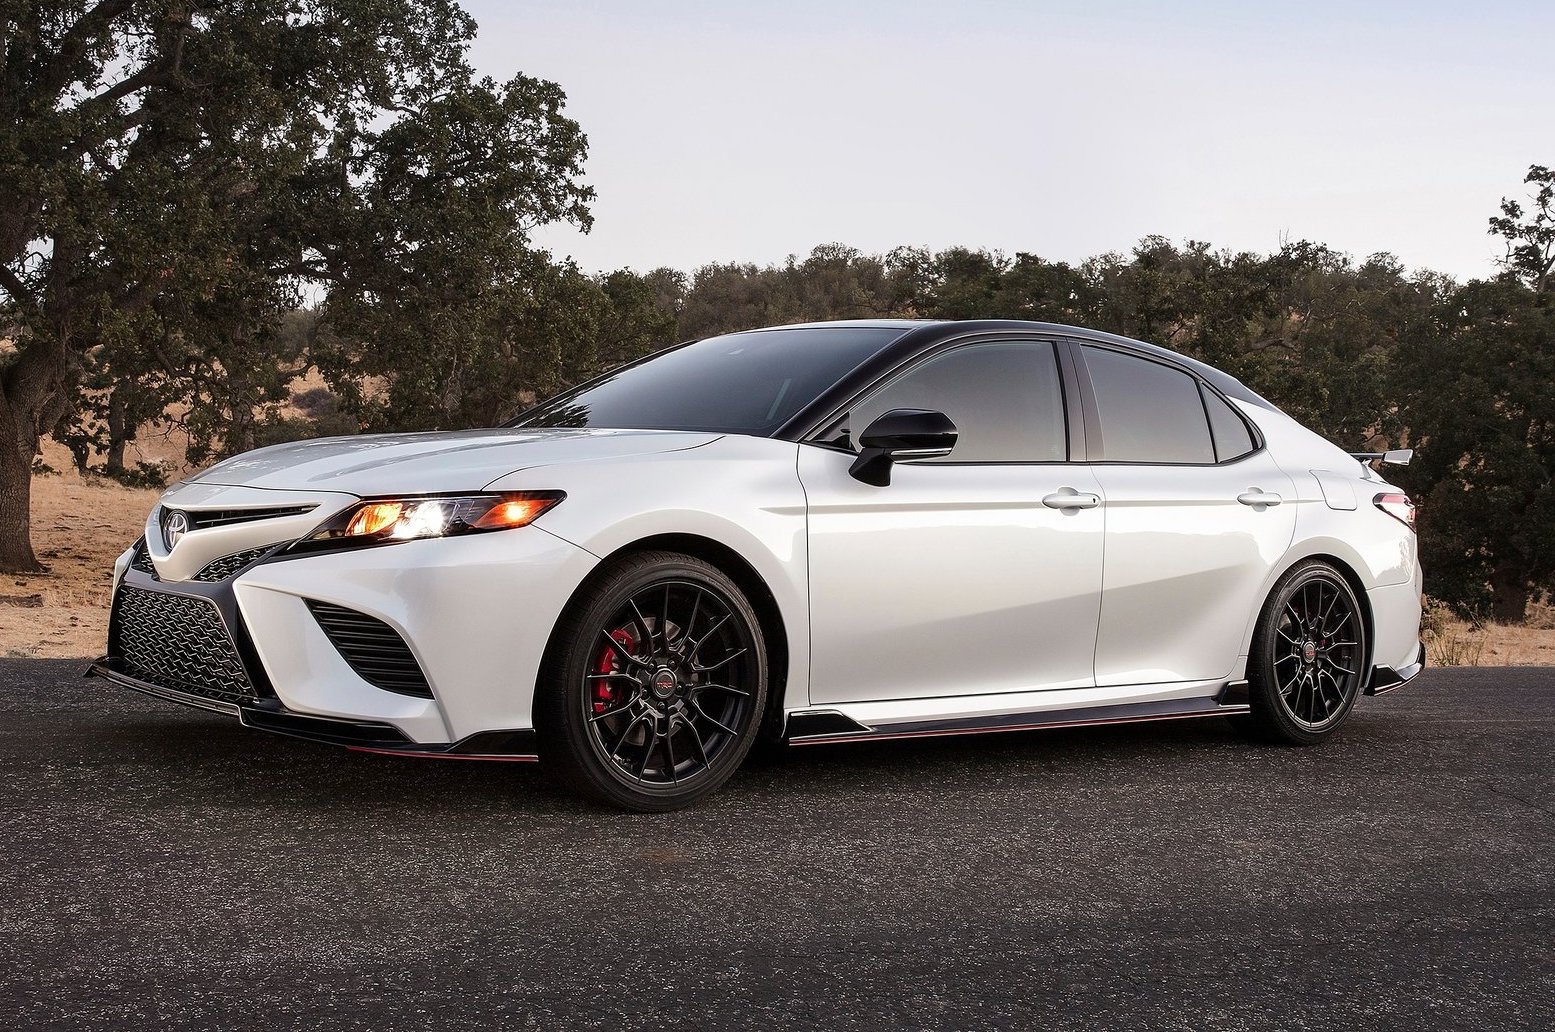 2020 Toyota Camry TRD shows racy appeal